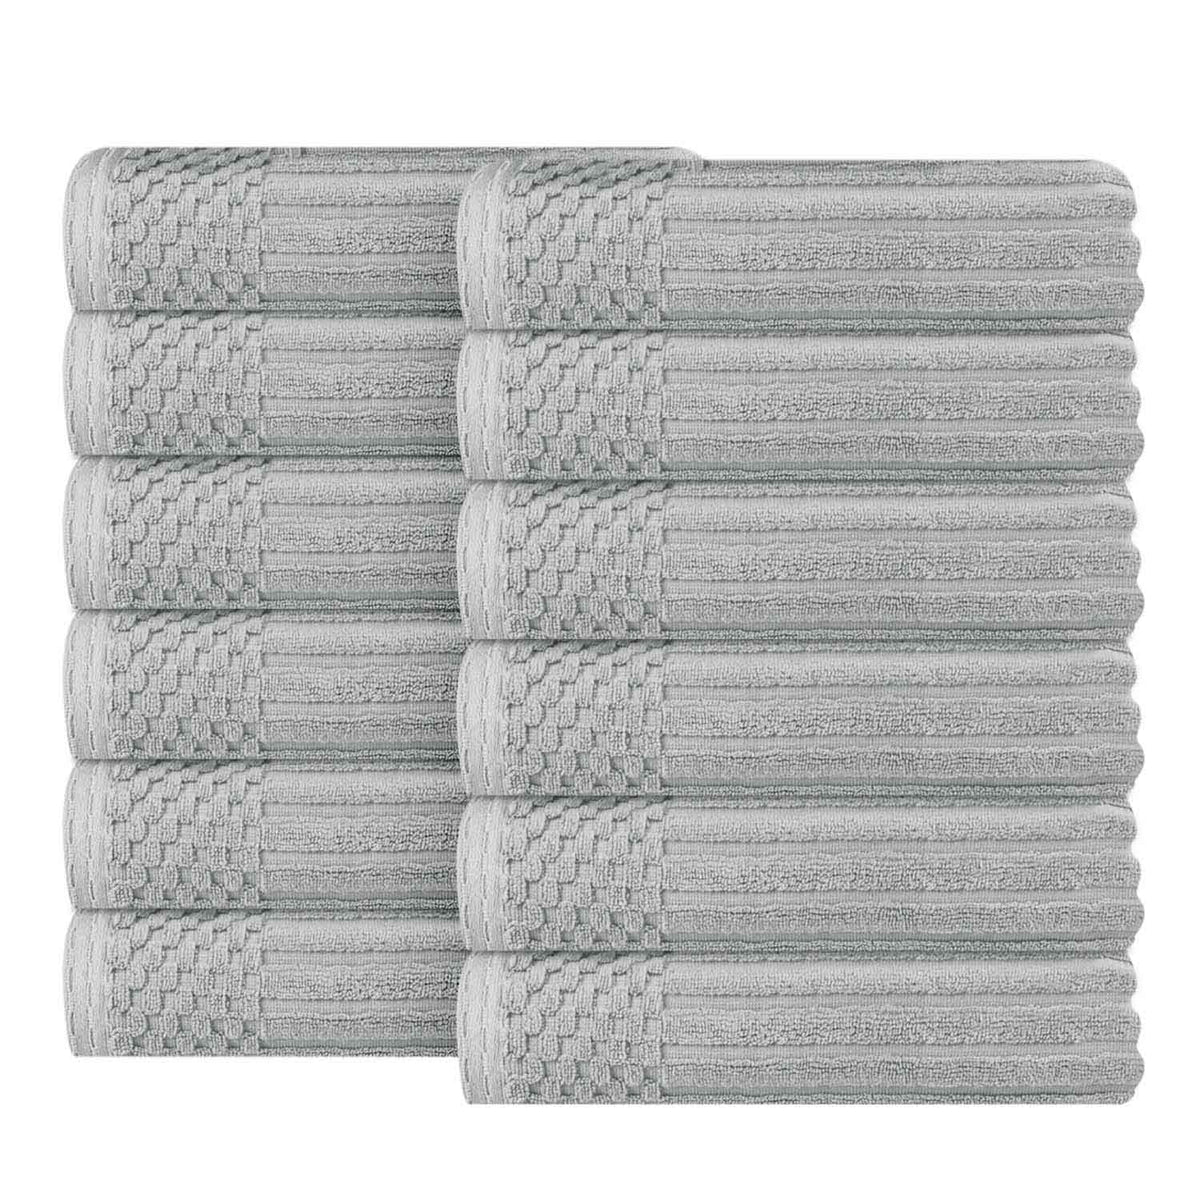 Soho Ribbed Cotton Absorbent Face Towel / Washcloth Set of 12 - Silver